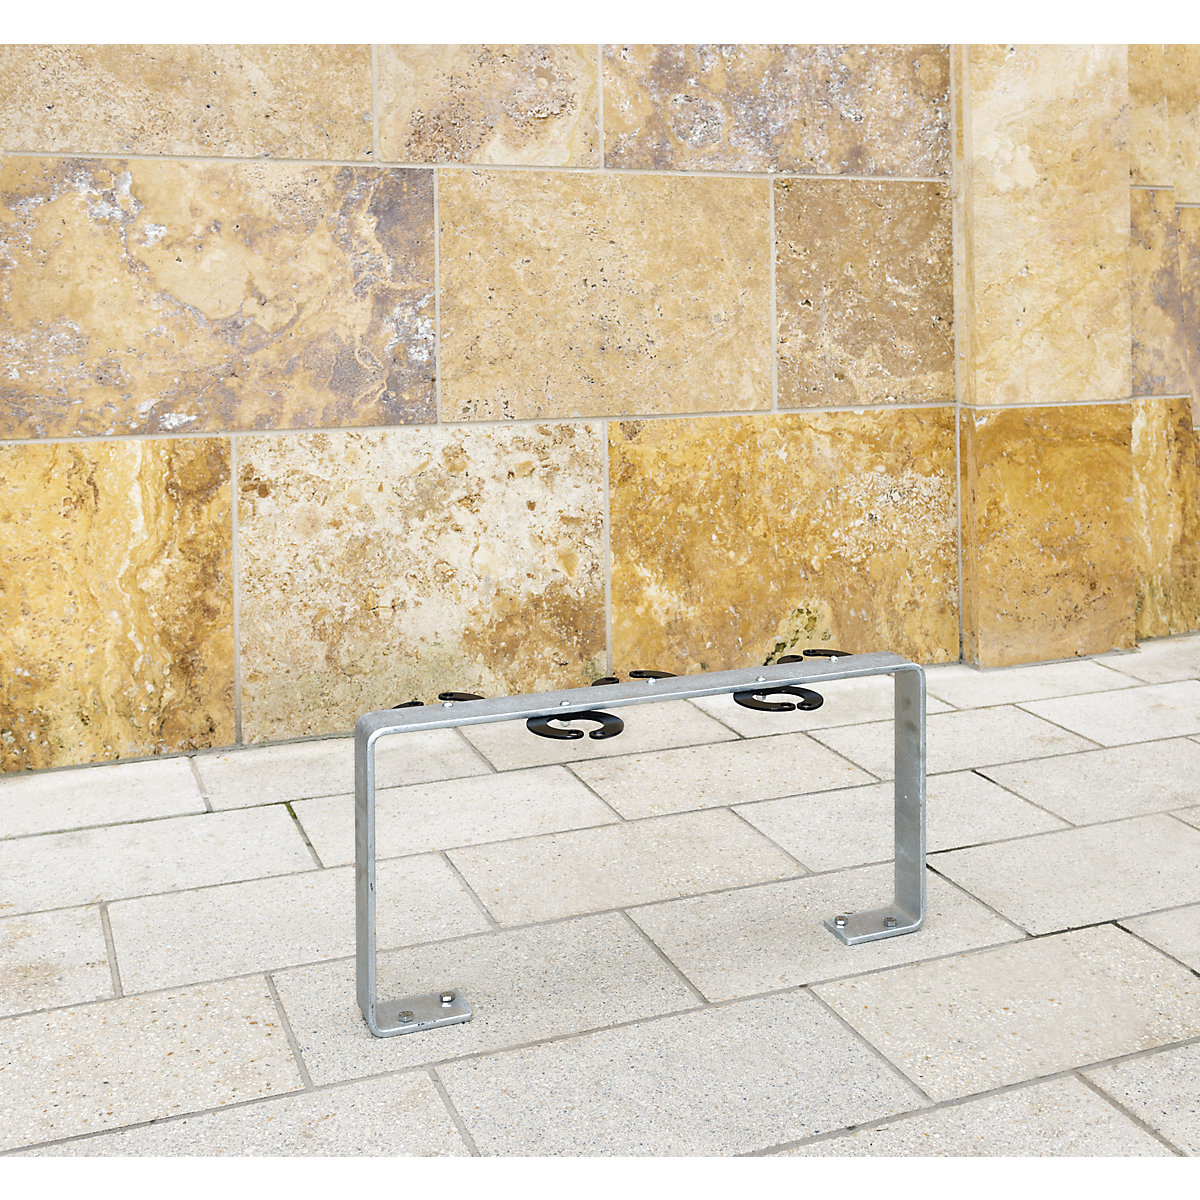 Scooter parking rail (Product illustration 2)-1